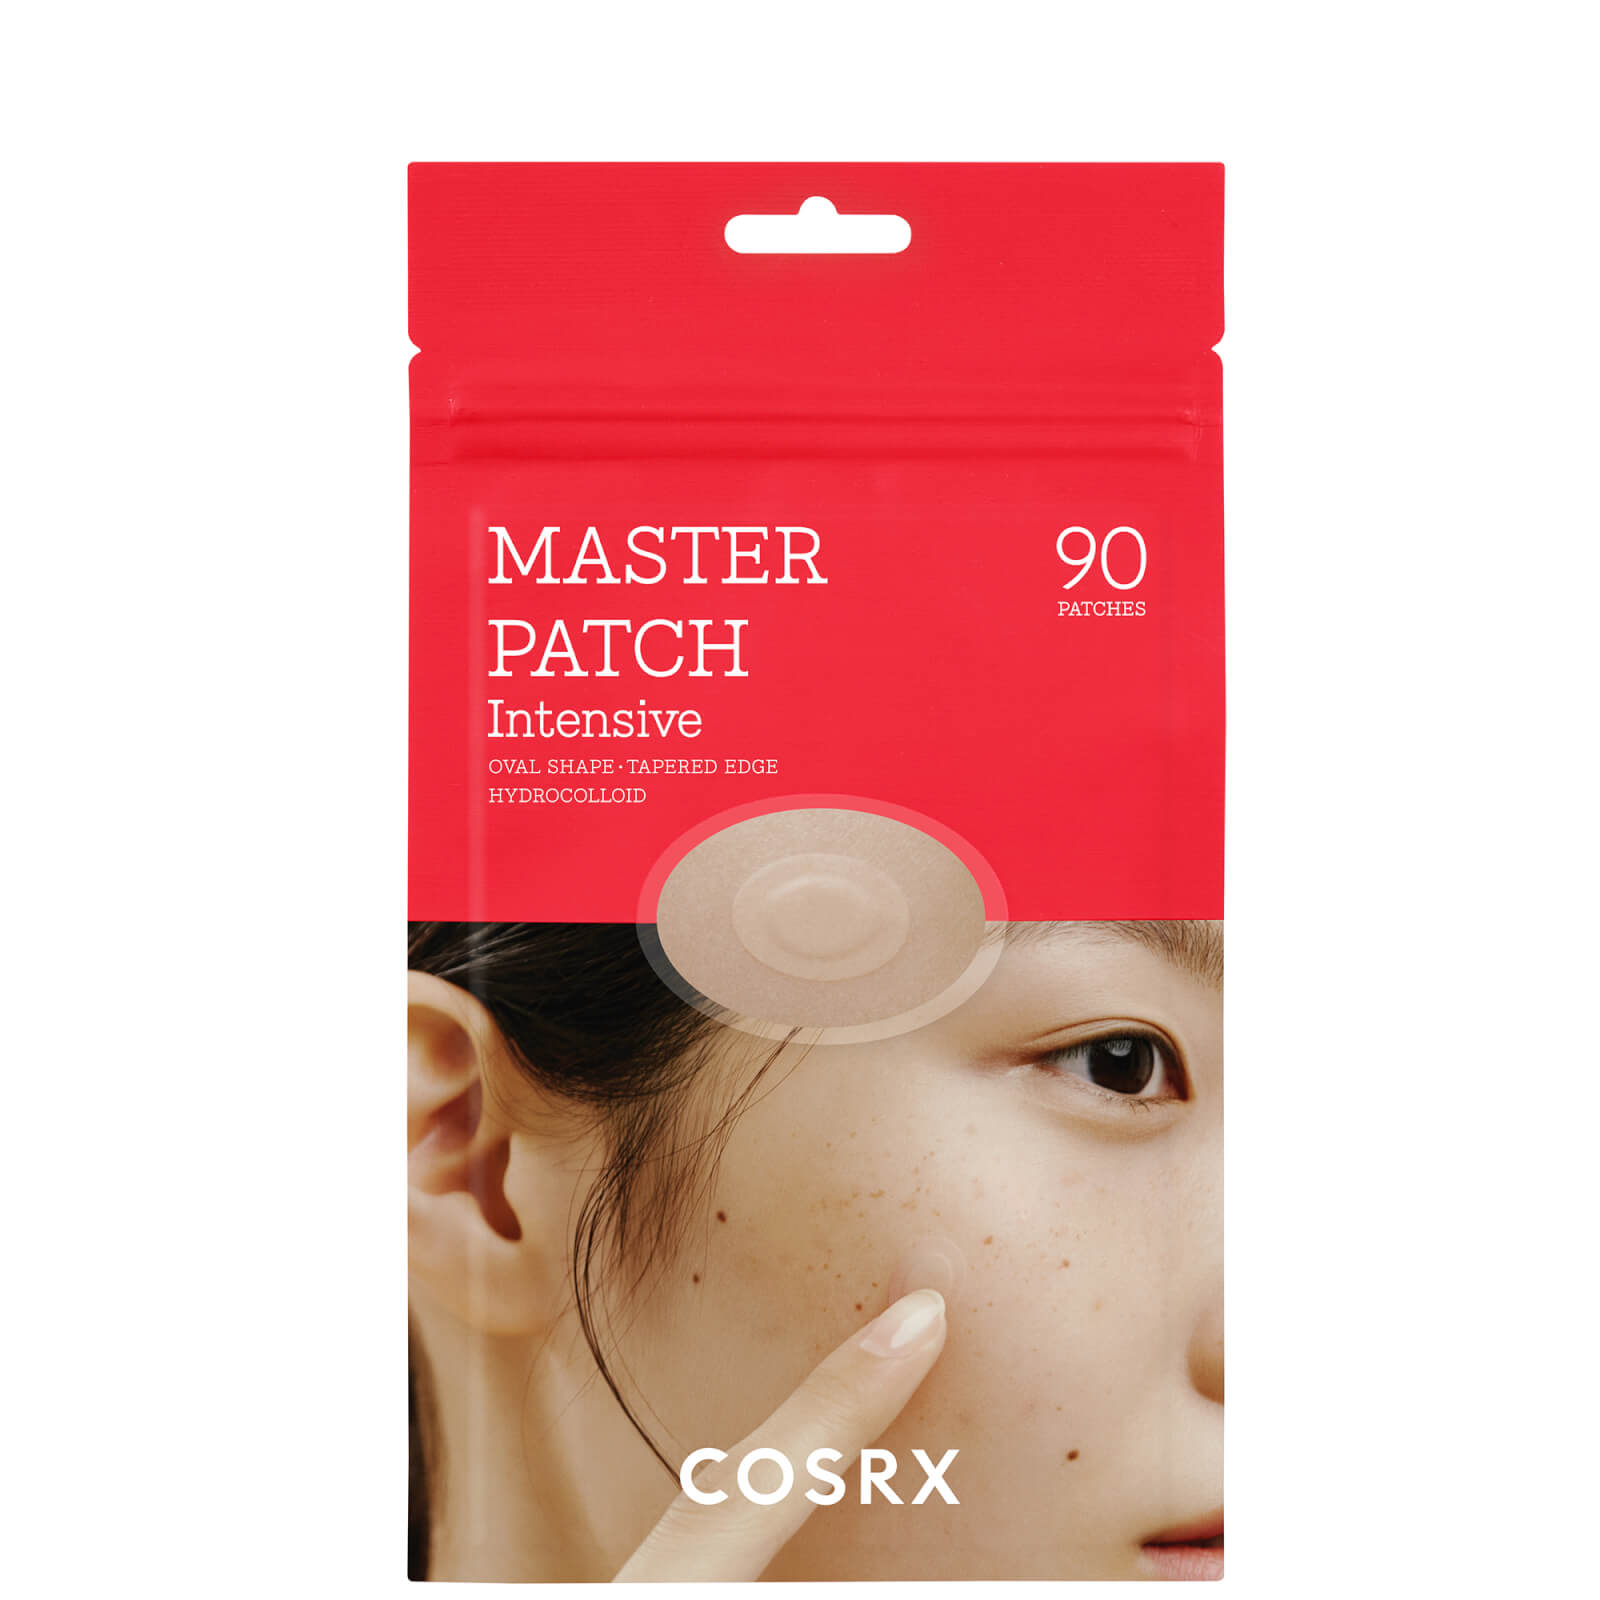 Photos - Cream / Lotion COSRX Master Patch Intensive  (90 Pack)